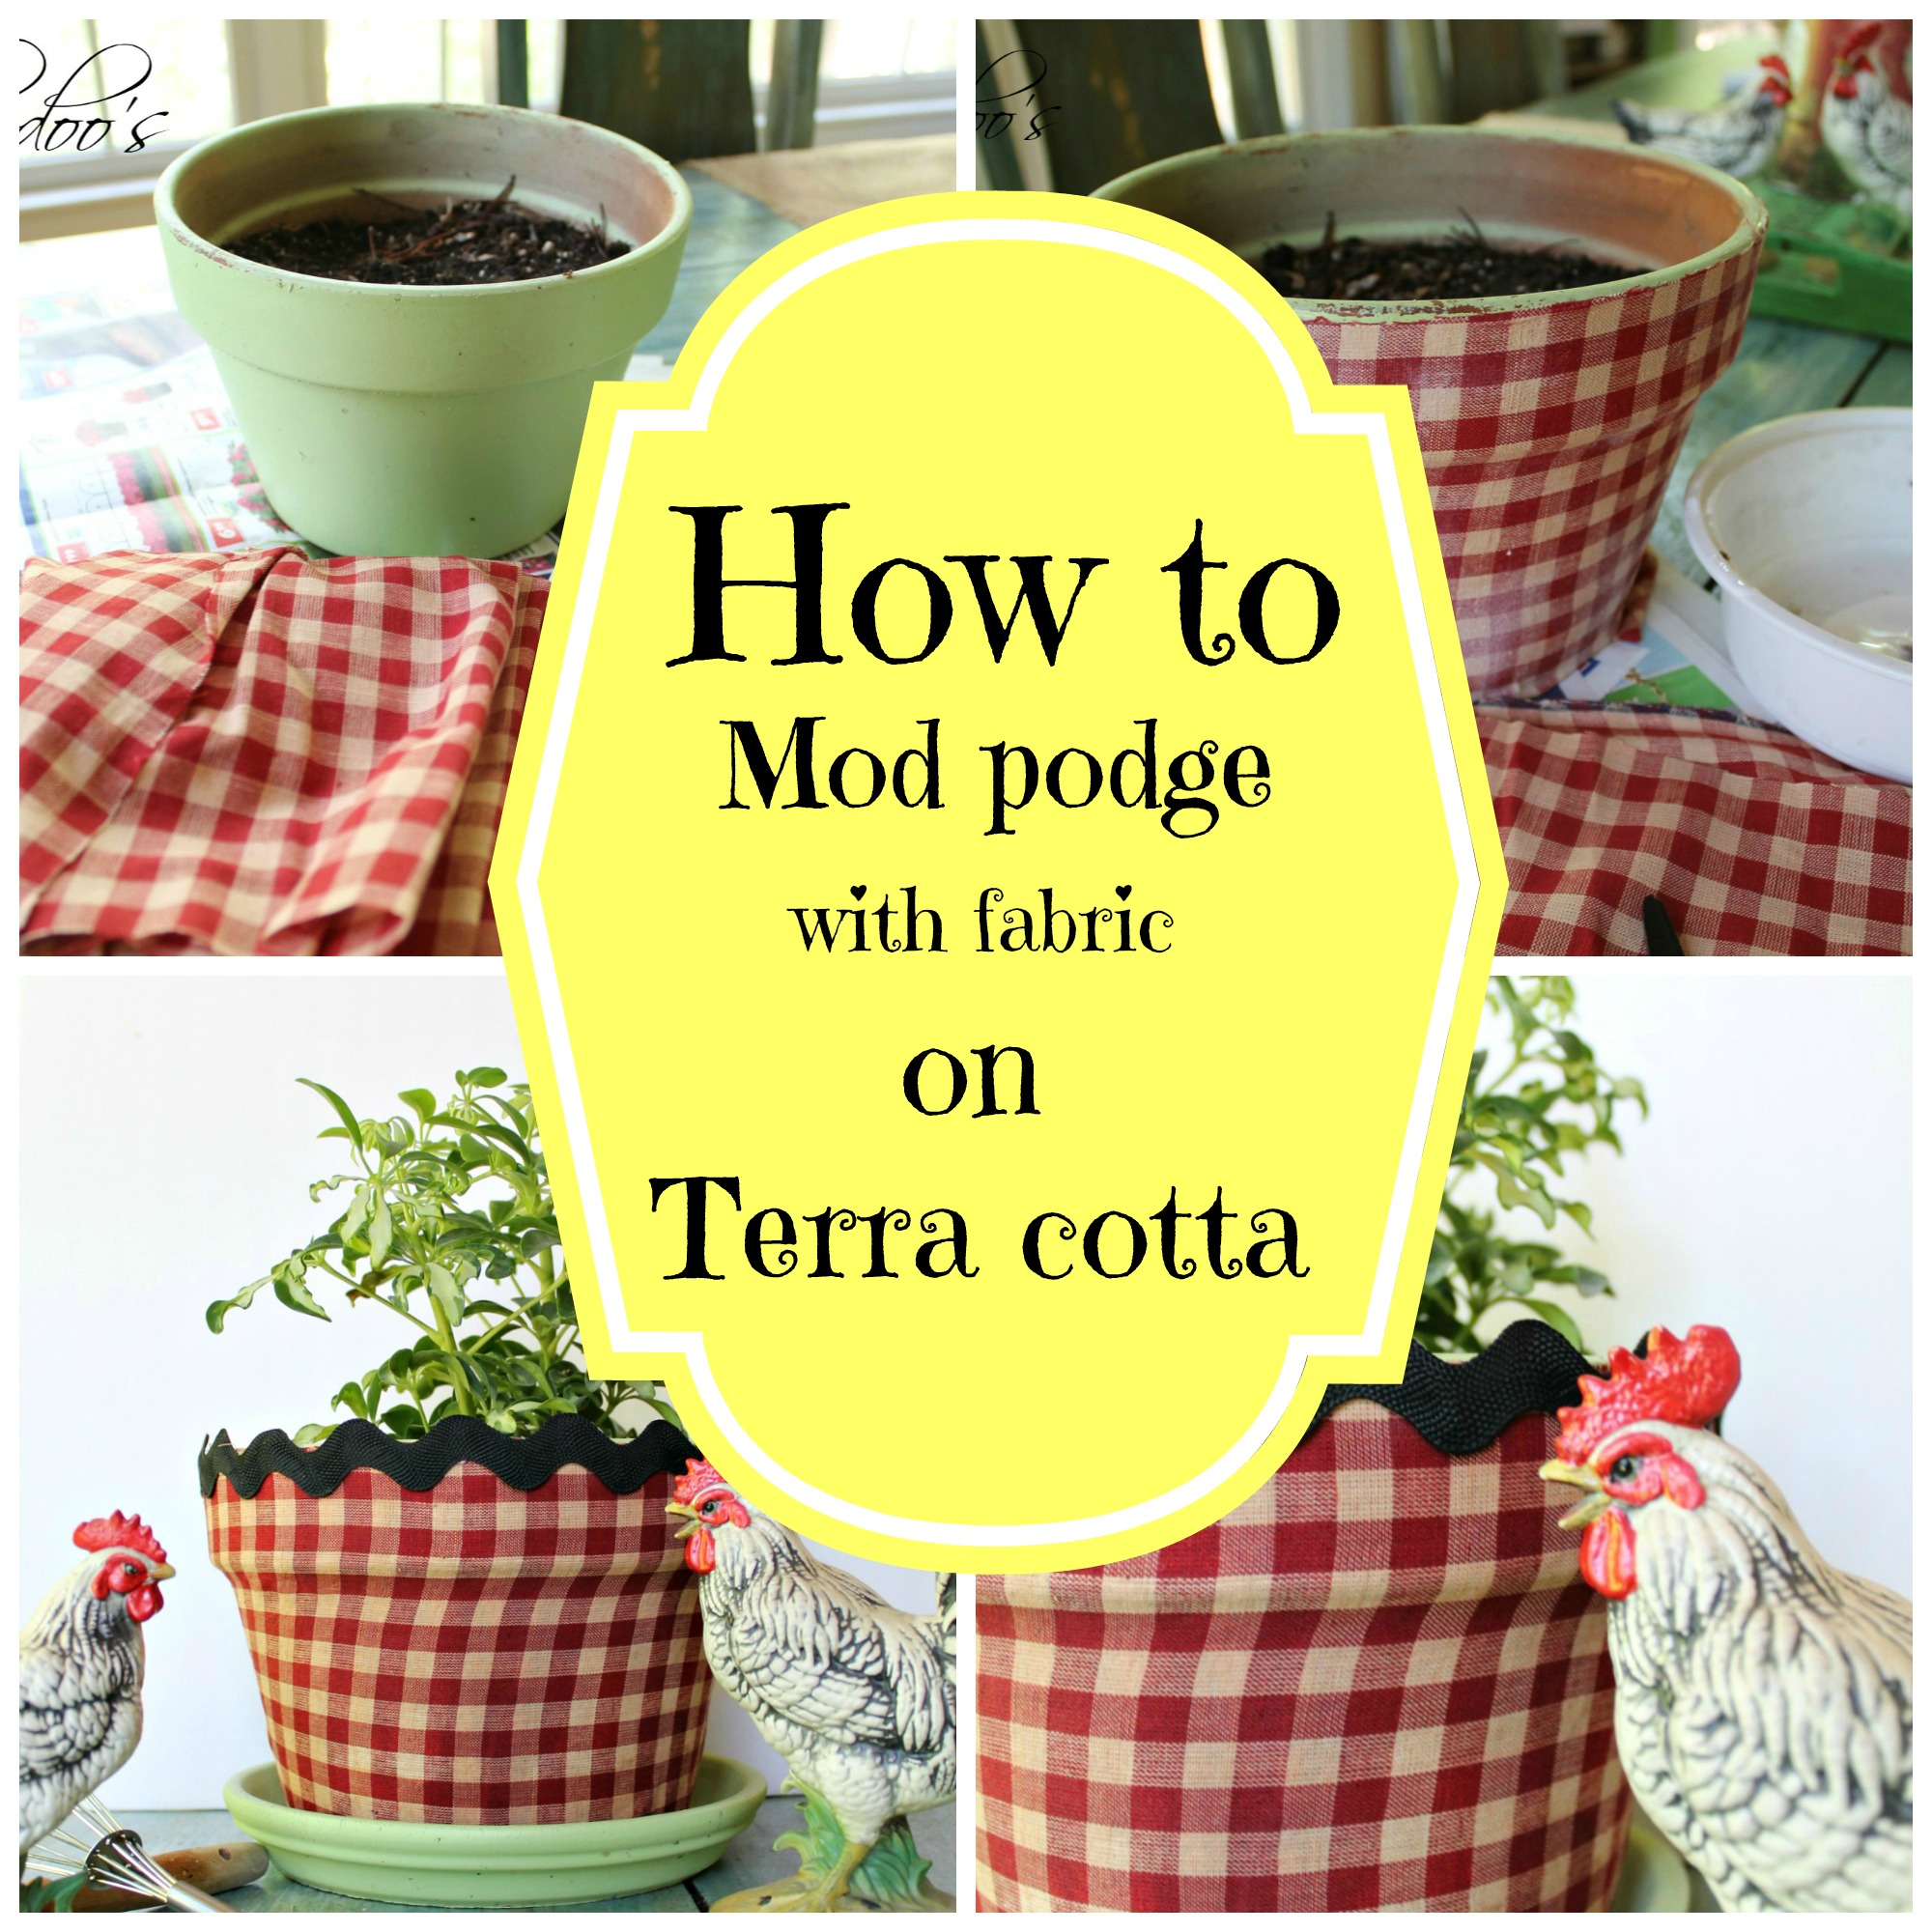 How to mod podge a terra cotta pot with fabric - Debbiedoo's